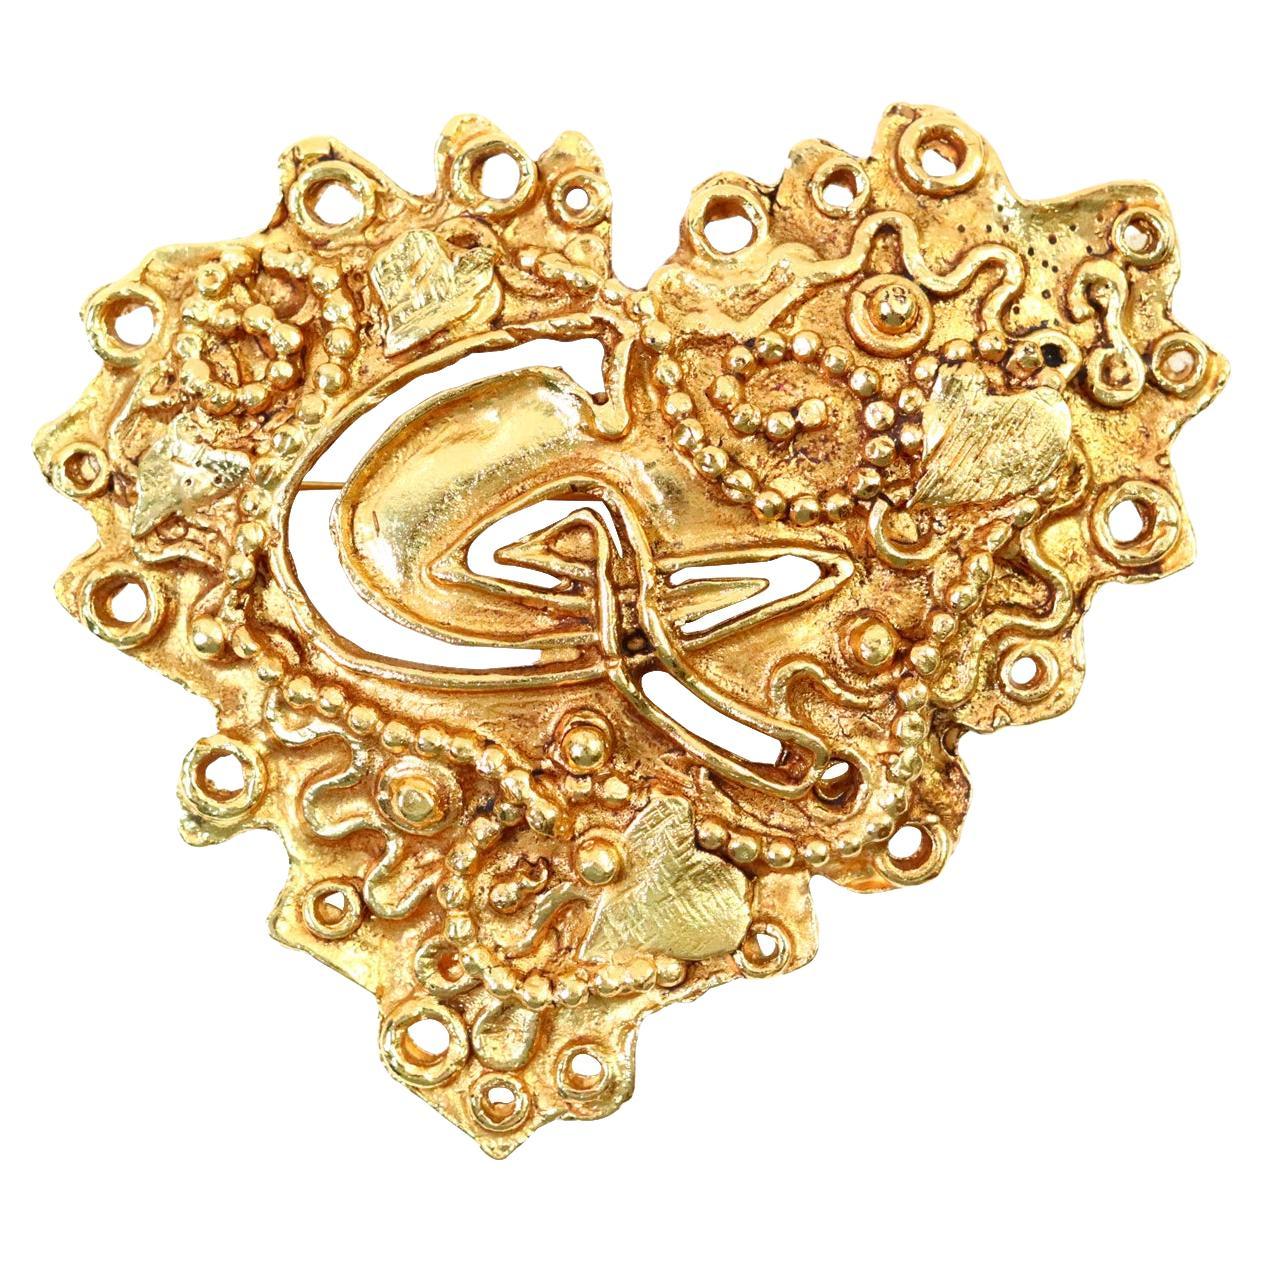 Vintage Christian Lacroix Gold Tone Heart Brooch with lots of Design and has Initials CL Carved in the Middle of the Misshapen Heart Brooch.  Matches a Bracelet that is on Site.  Same Interesting Texture. 

Lacroix says his fashion icon is The Queen